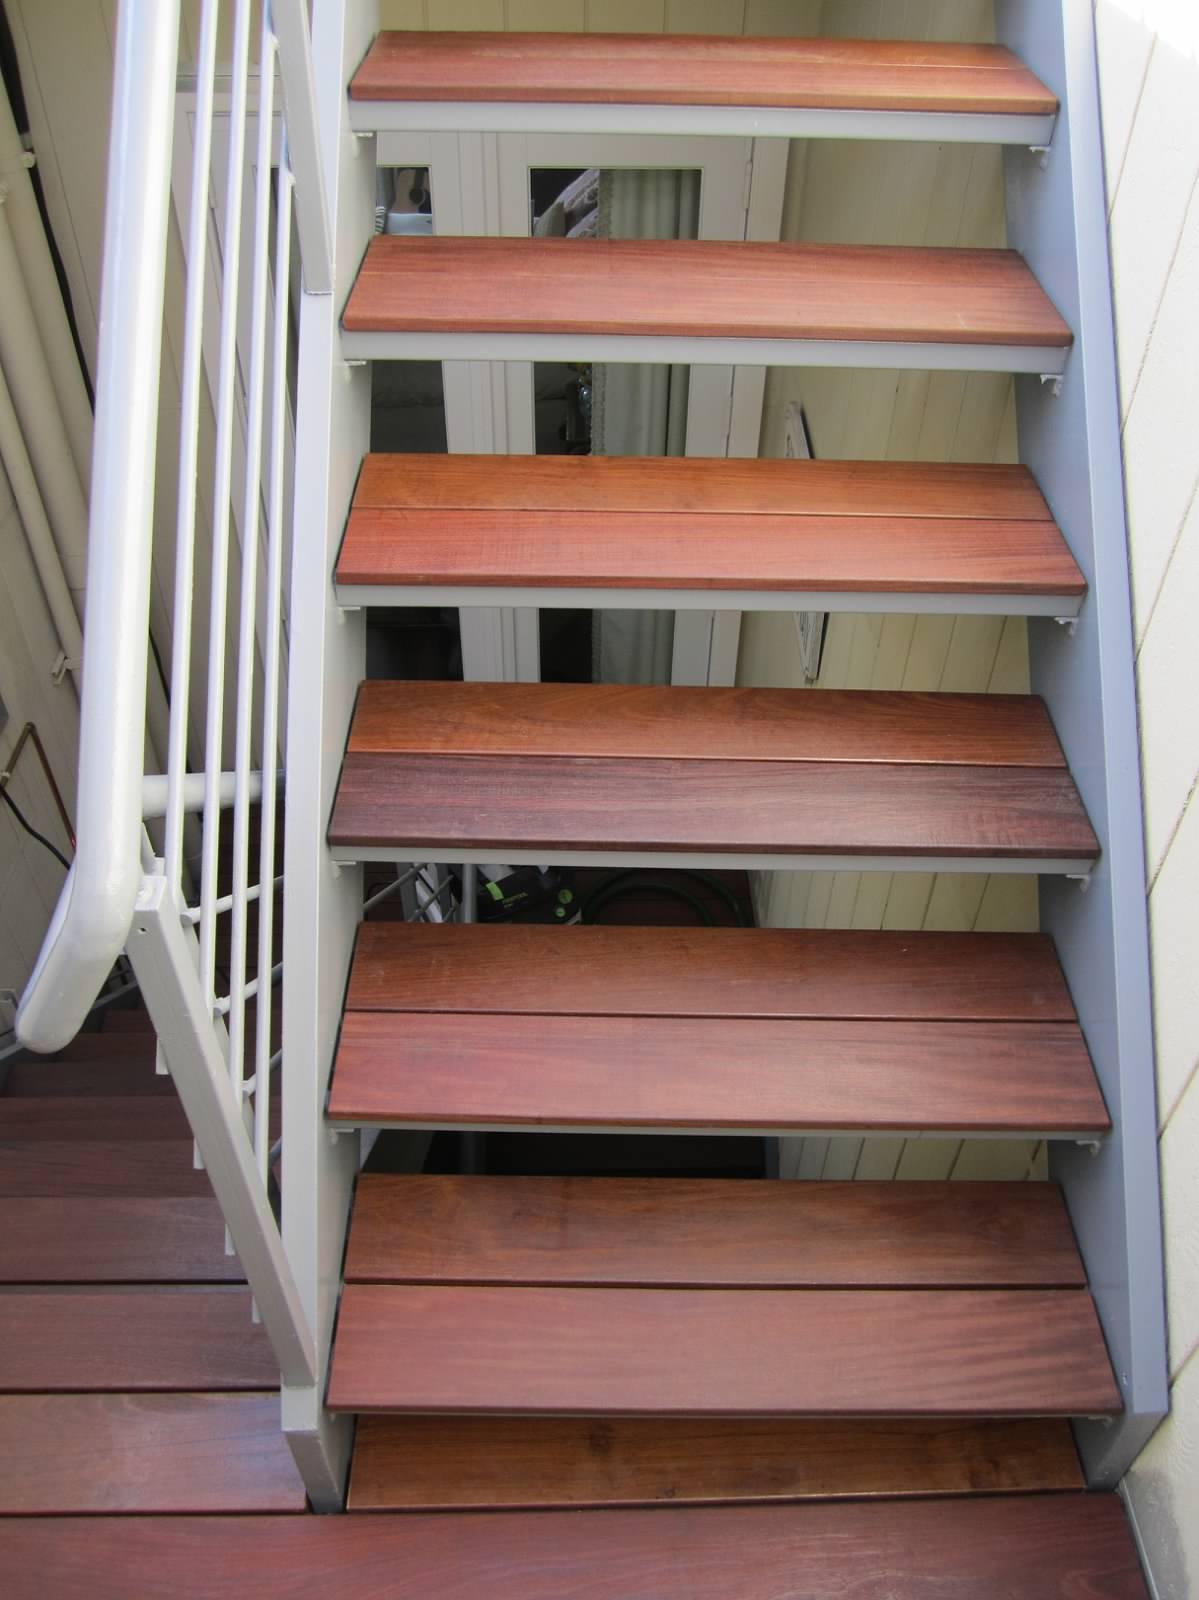 Ipe stairs and decking, San Francisco